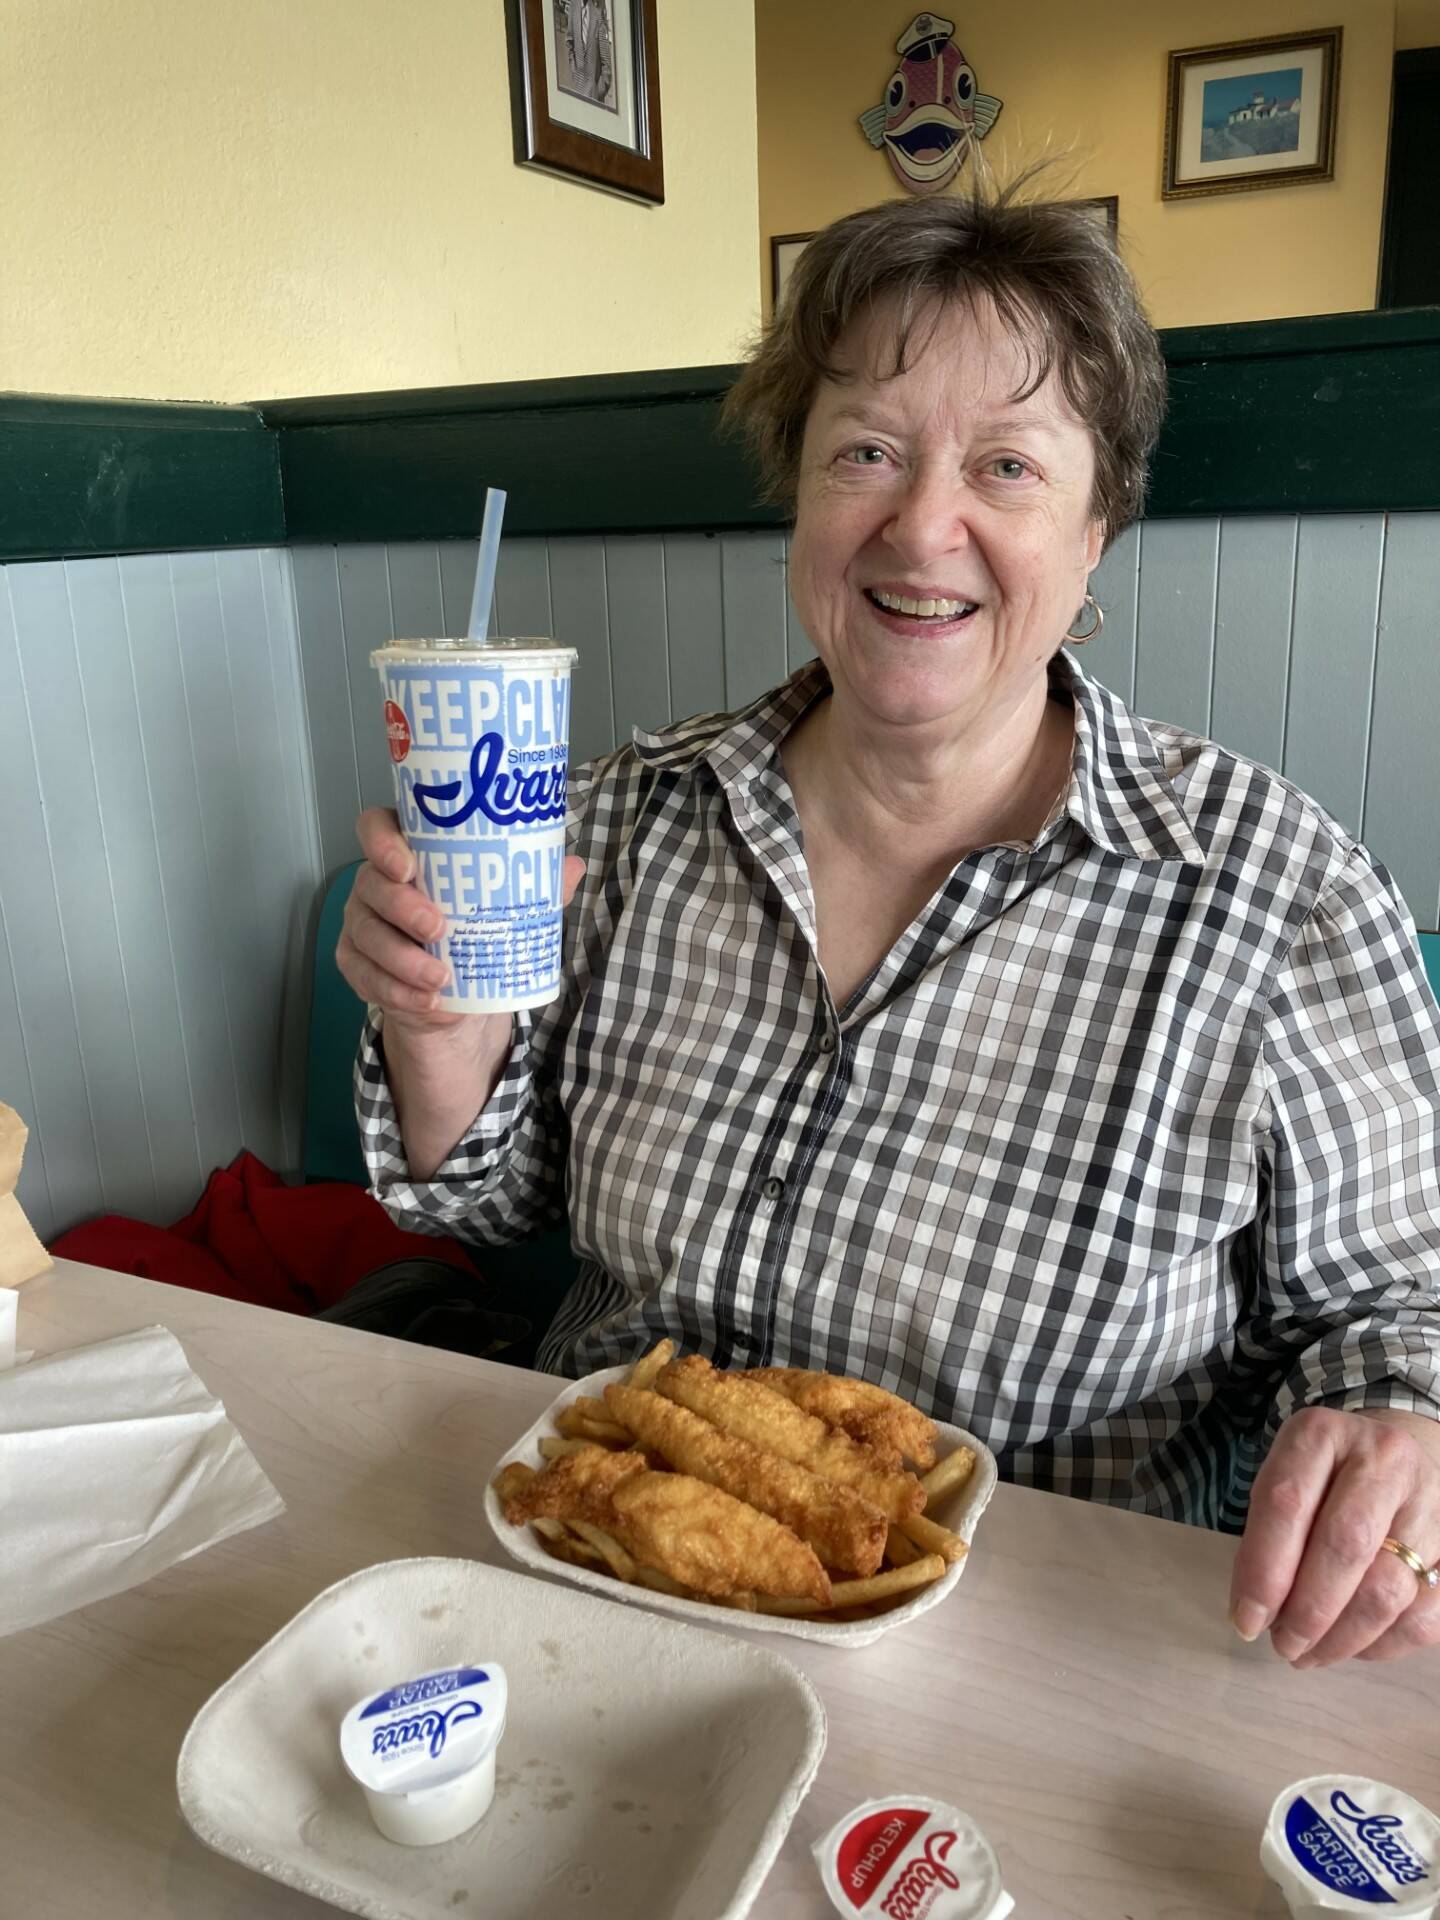 Deb, Eric Arnold’s wife, enjoys some free fish and chips courtesy of Ivar’s. (Photo provided)